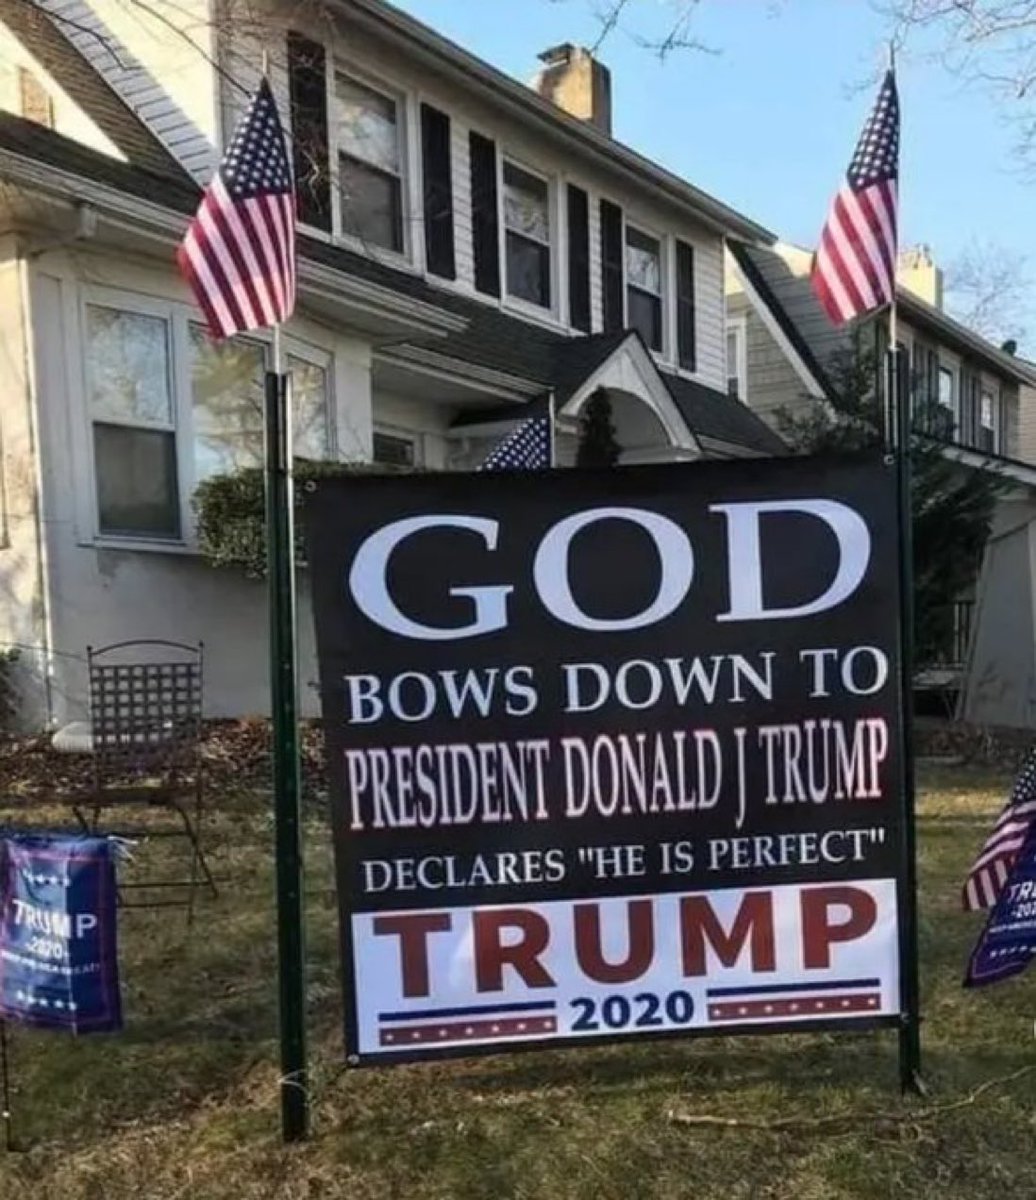 Your neighbor puts out this sign. What’s your reaction?